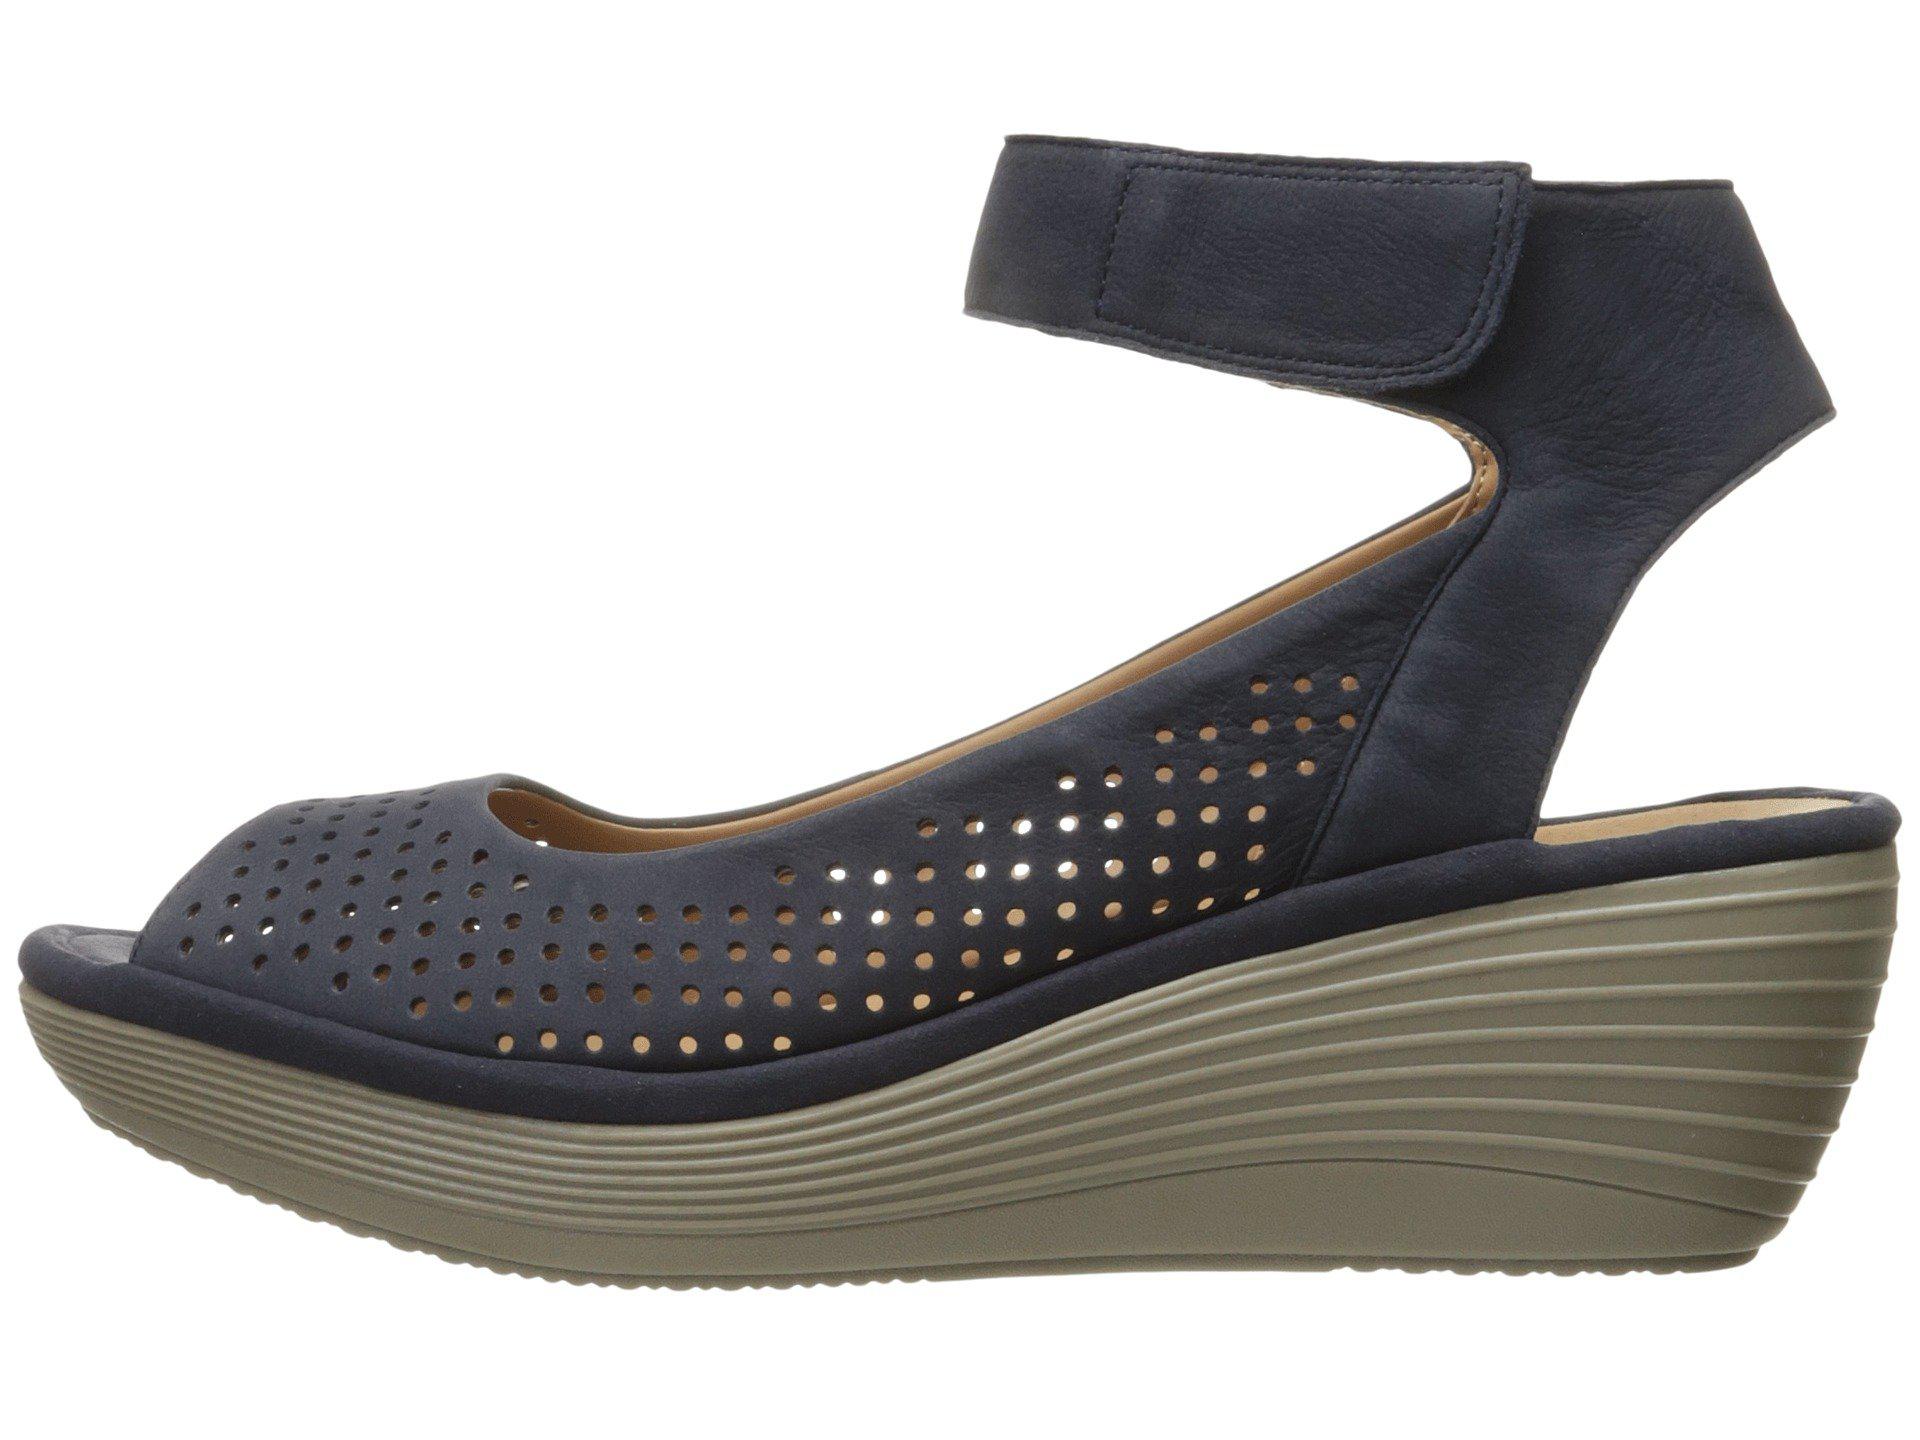 Clarks Leather Reedly Salene Wedge 